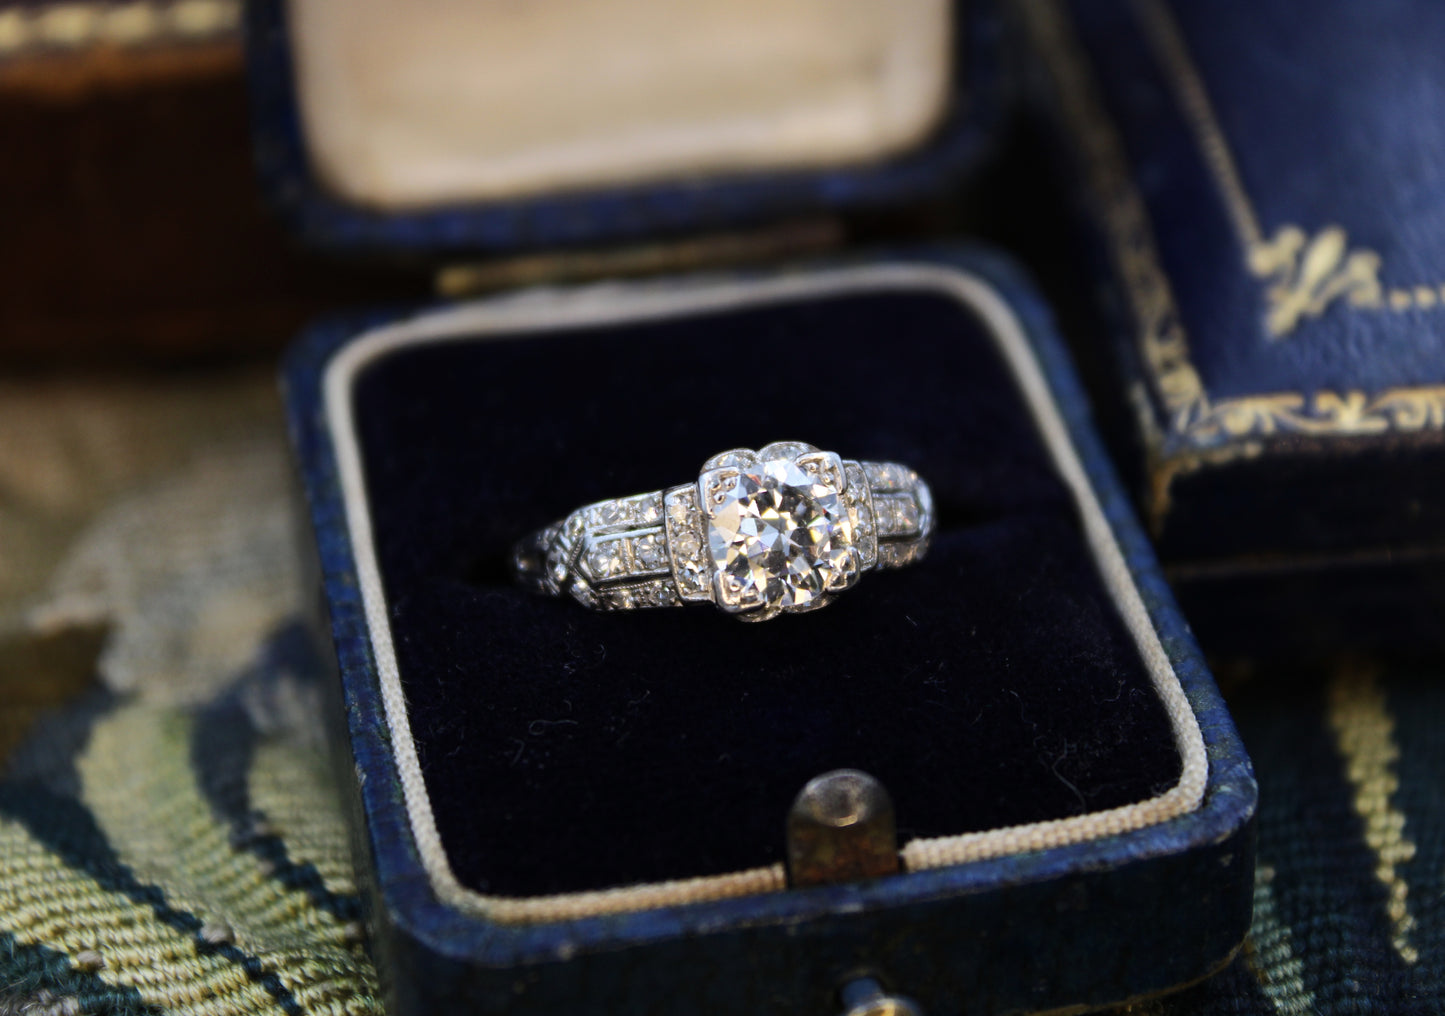 A very fine Art Deco 0.85ct Diamond Solitaire Ring mounted in Platinum, Circa 1930 - Robin Haydock Antiques